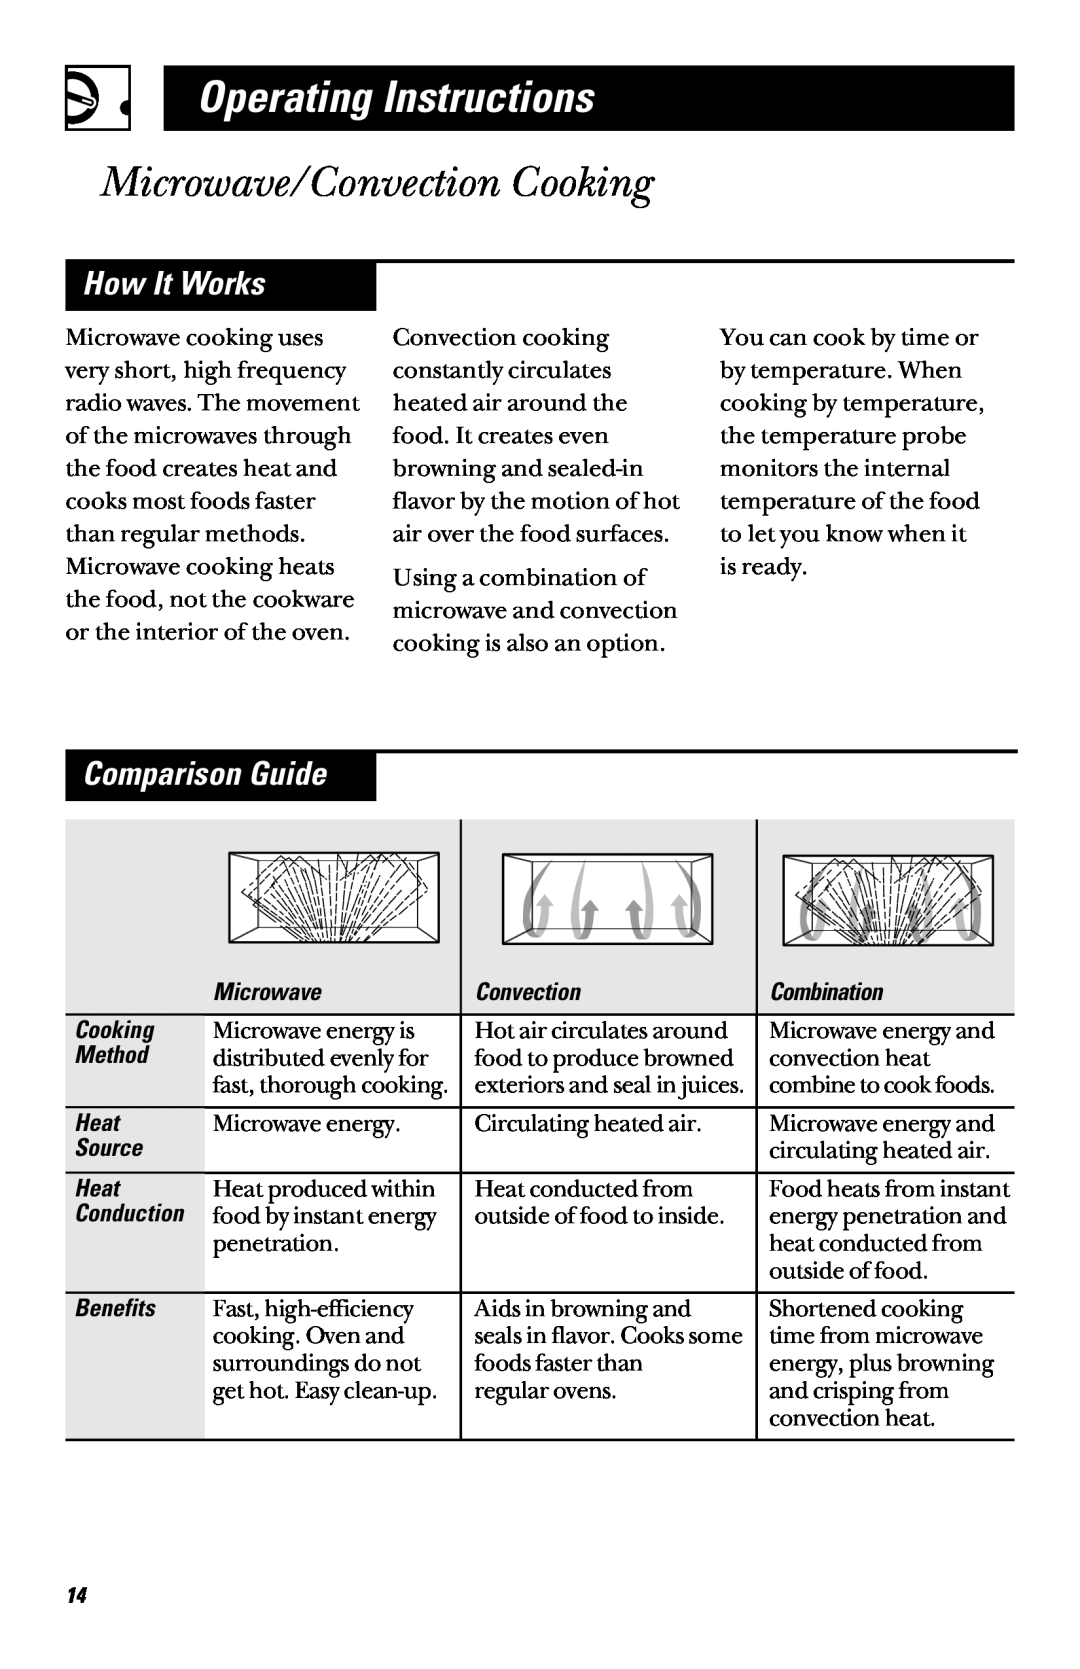 GE 164D3370P003, JVM1090, 49-40002 Microwave/Convection Cooking, How It Works, Comparison Guide, Operating Instructions 